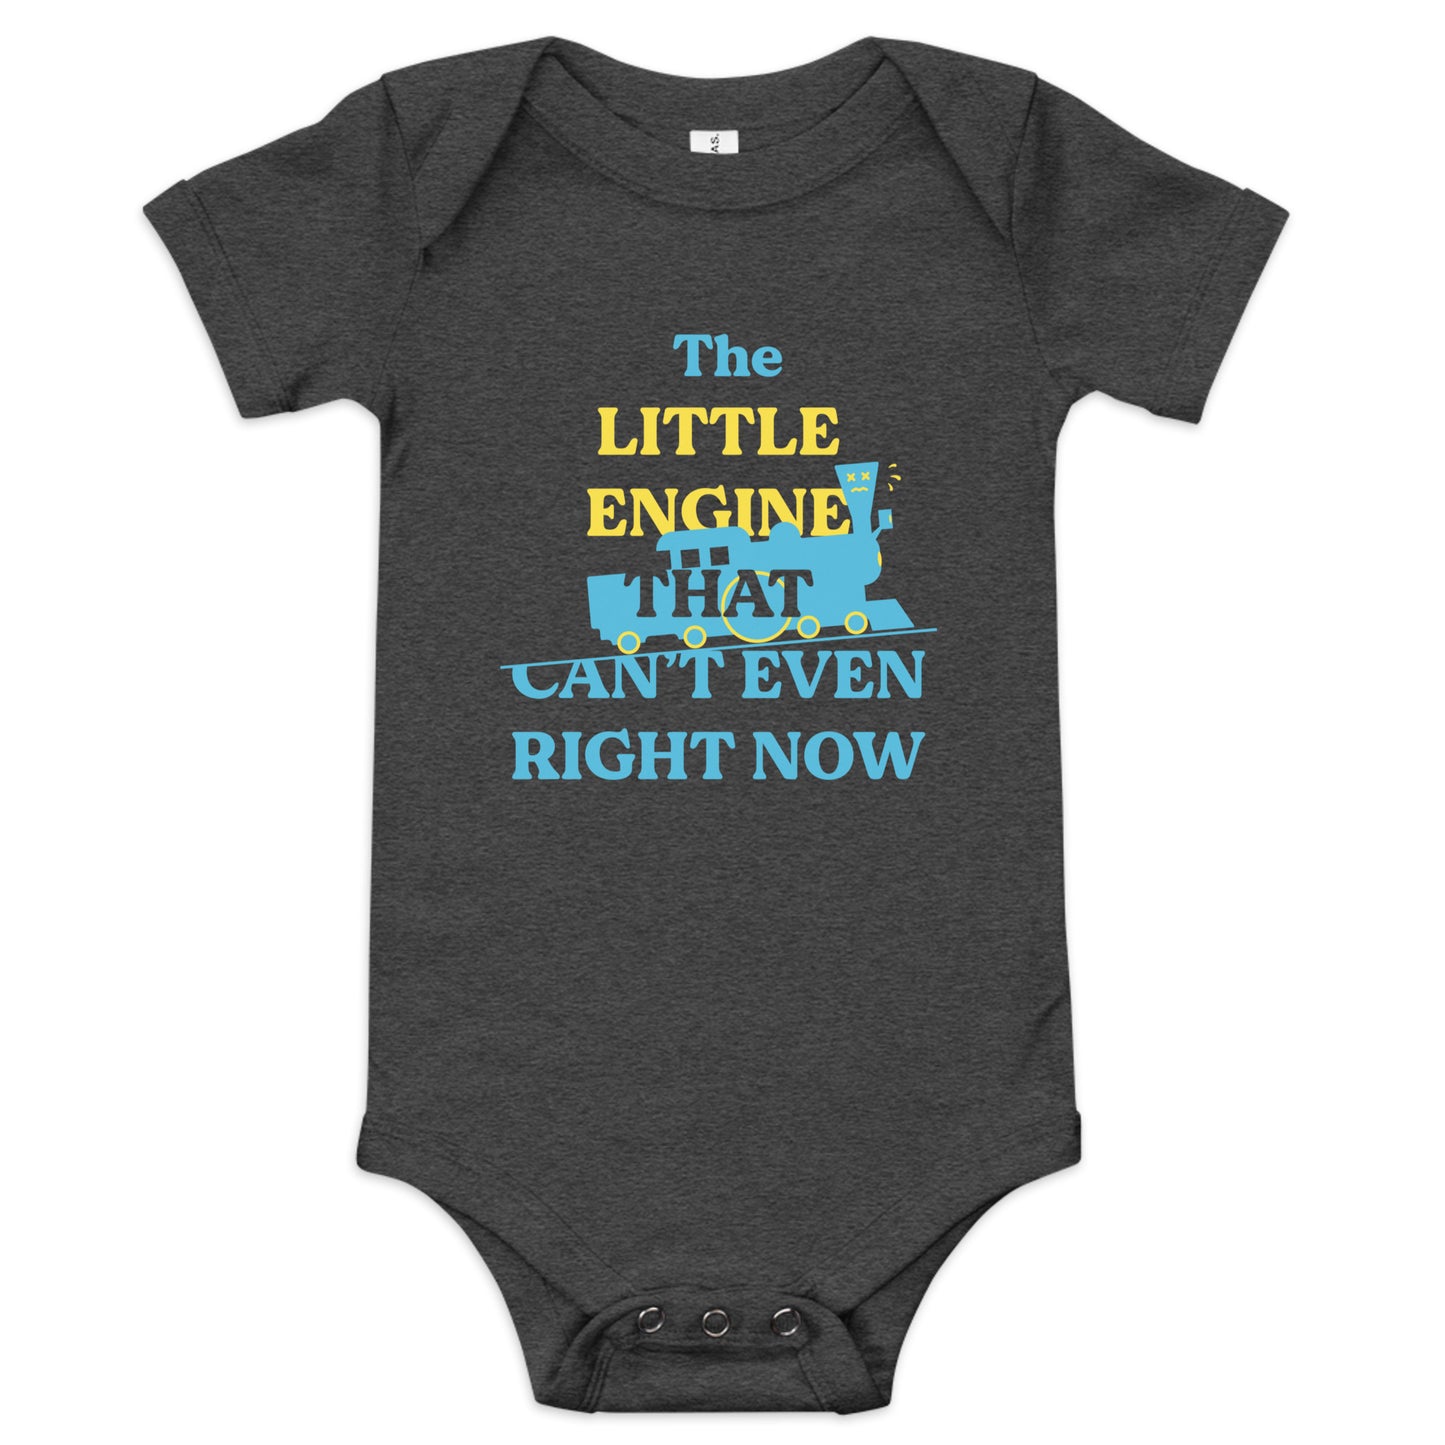 The Little Engine That Can't Even Right Now Kid's Onesie